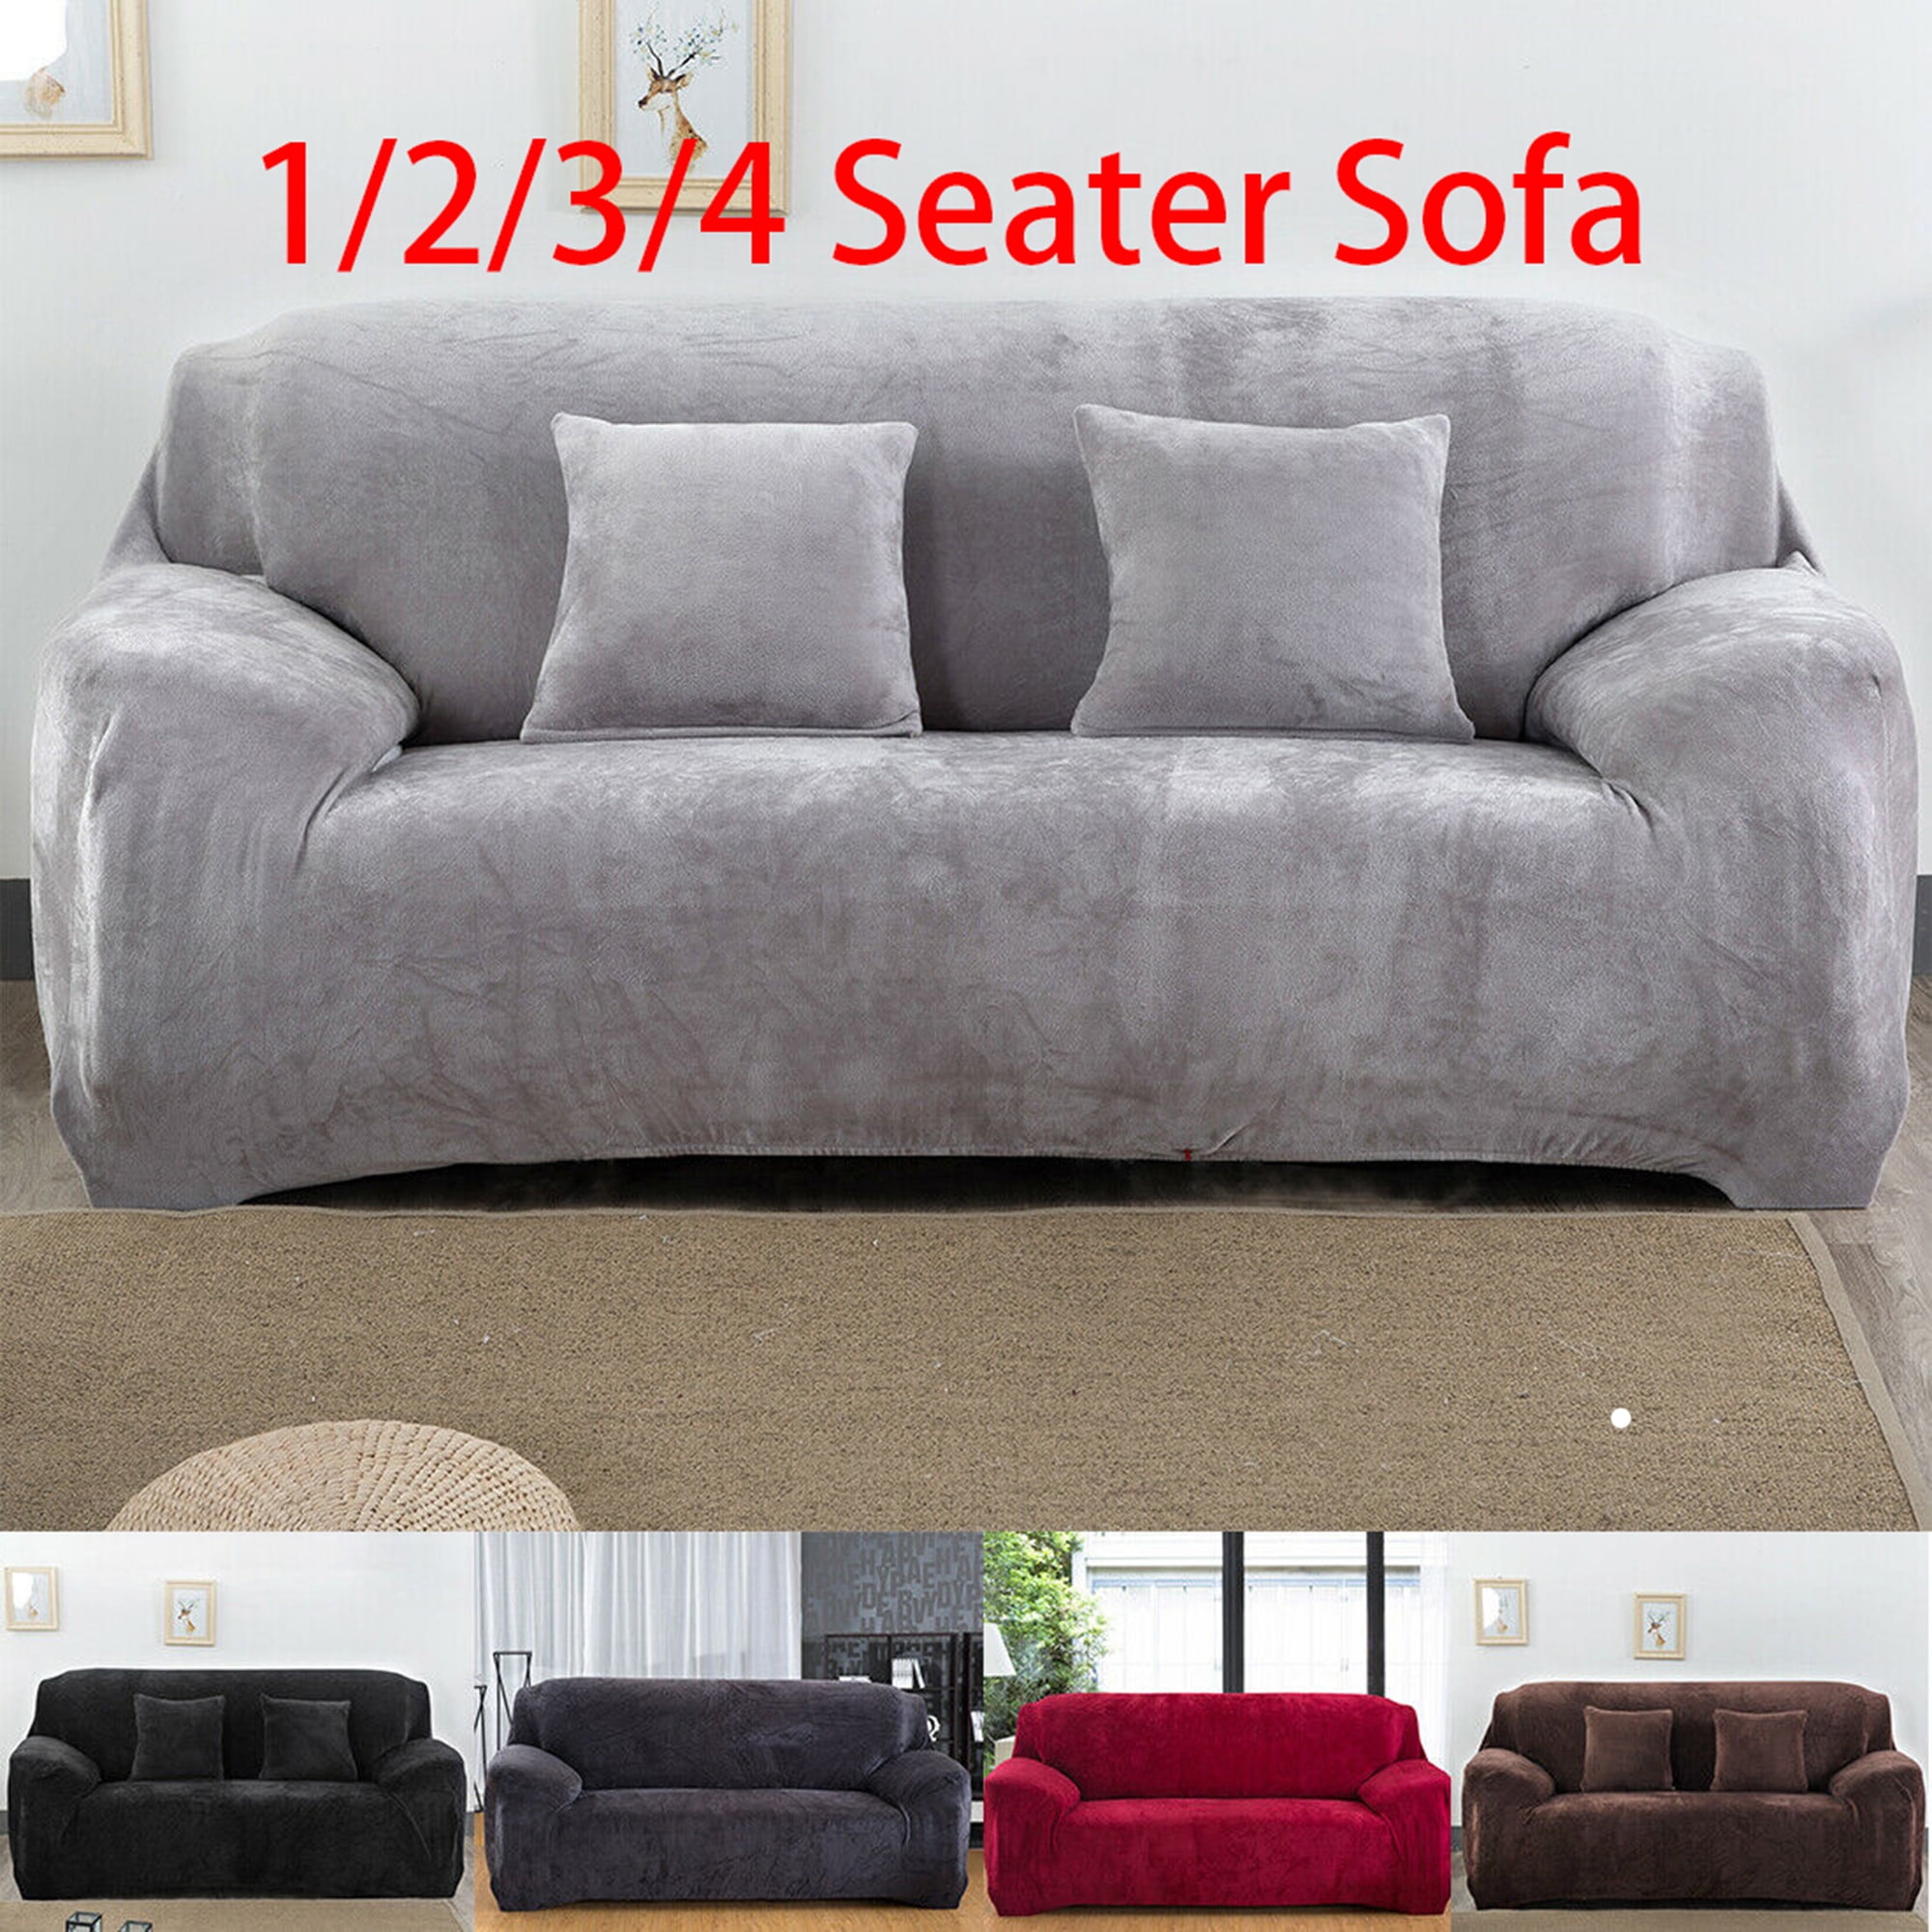 Details about   1-4 Seater Sofa Slipcovers Couch Cover Stretch Elastic Sweet Home Decor Bedroom 